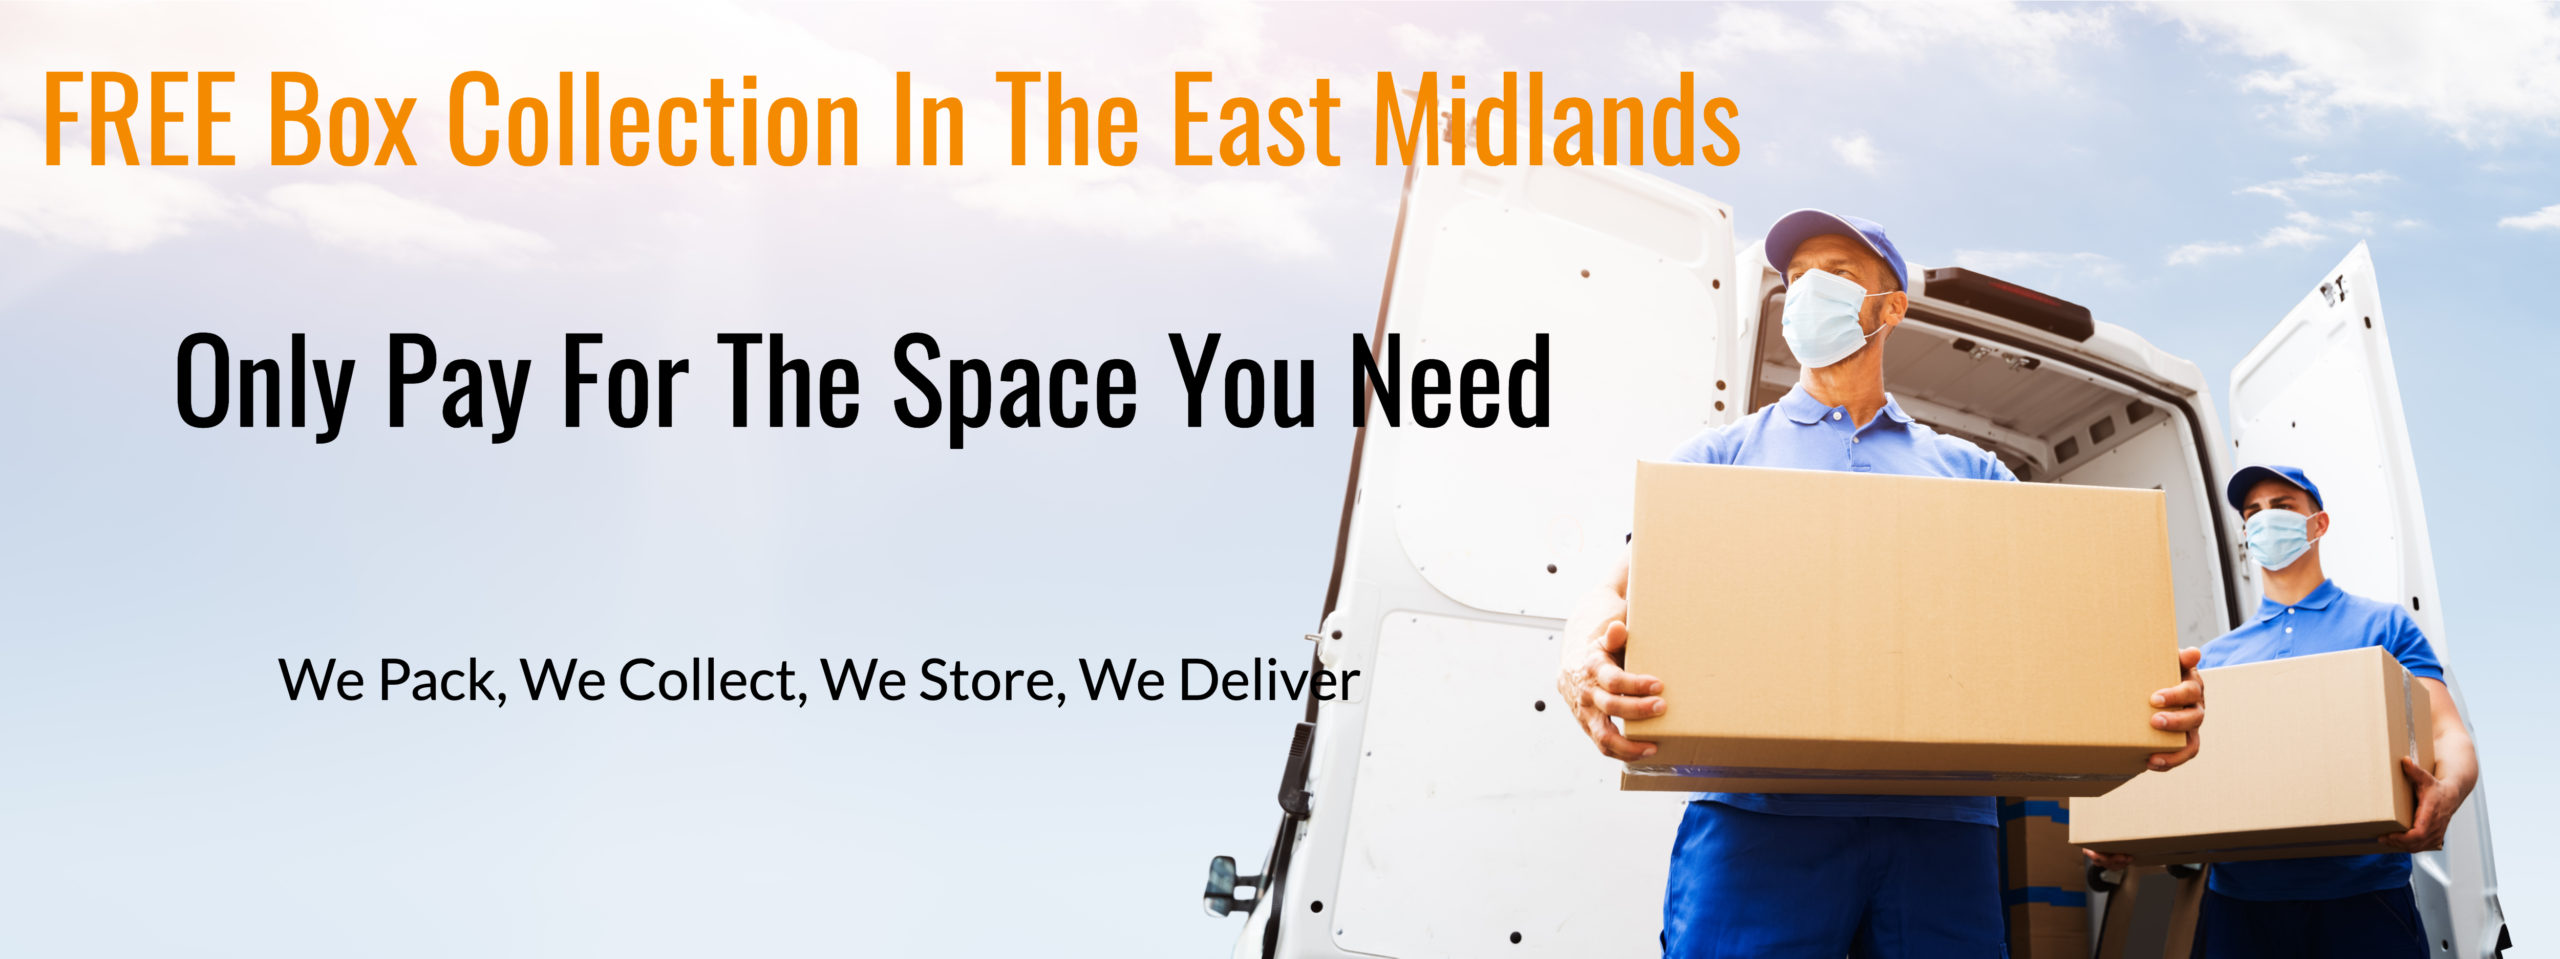 Student Storage By The Box FREE Collection In Leicestershire & East Midlands